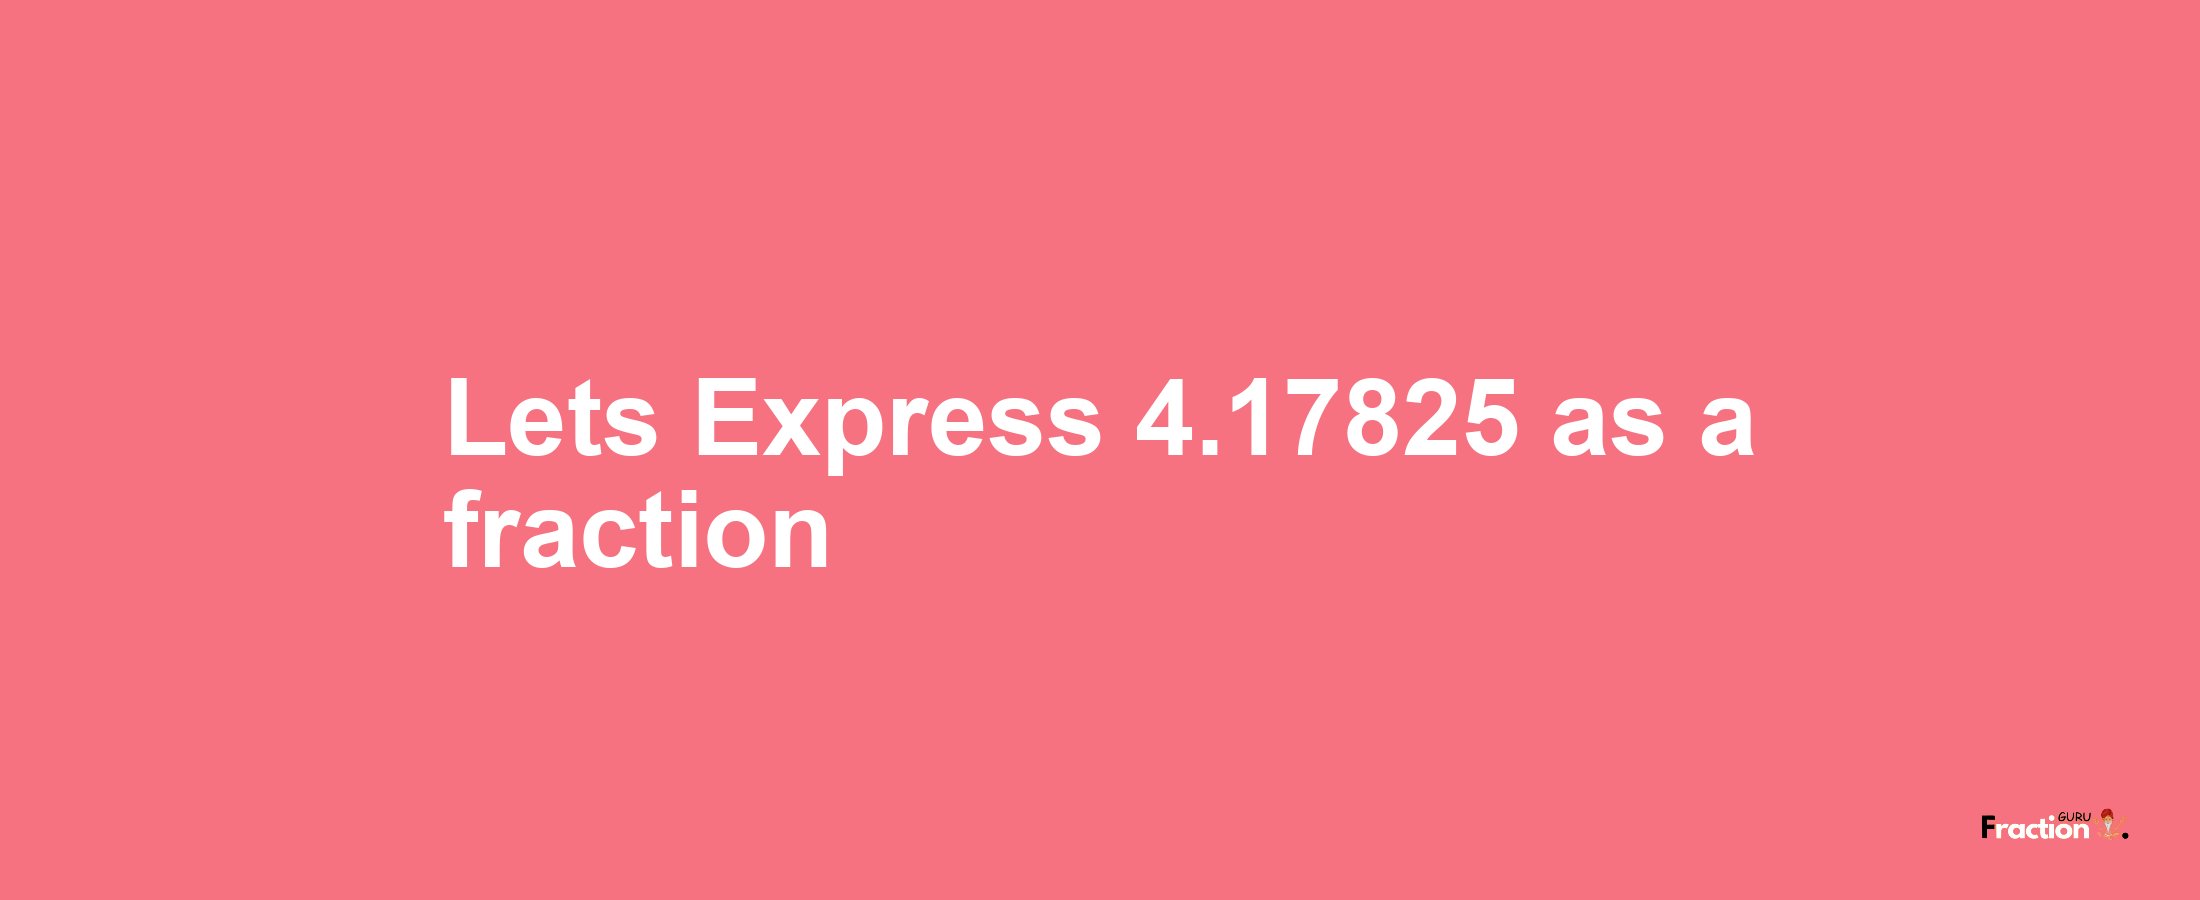 Lets Express 4.17825 as afraction